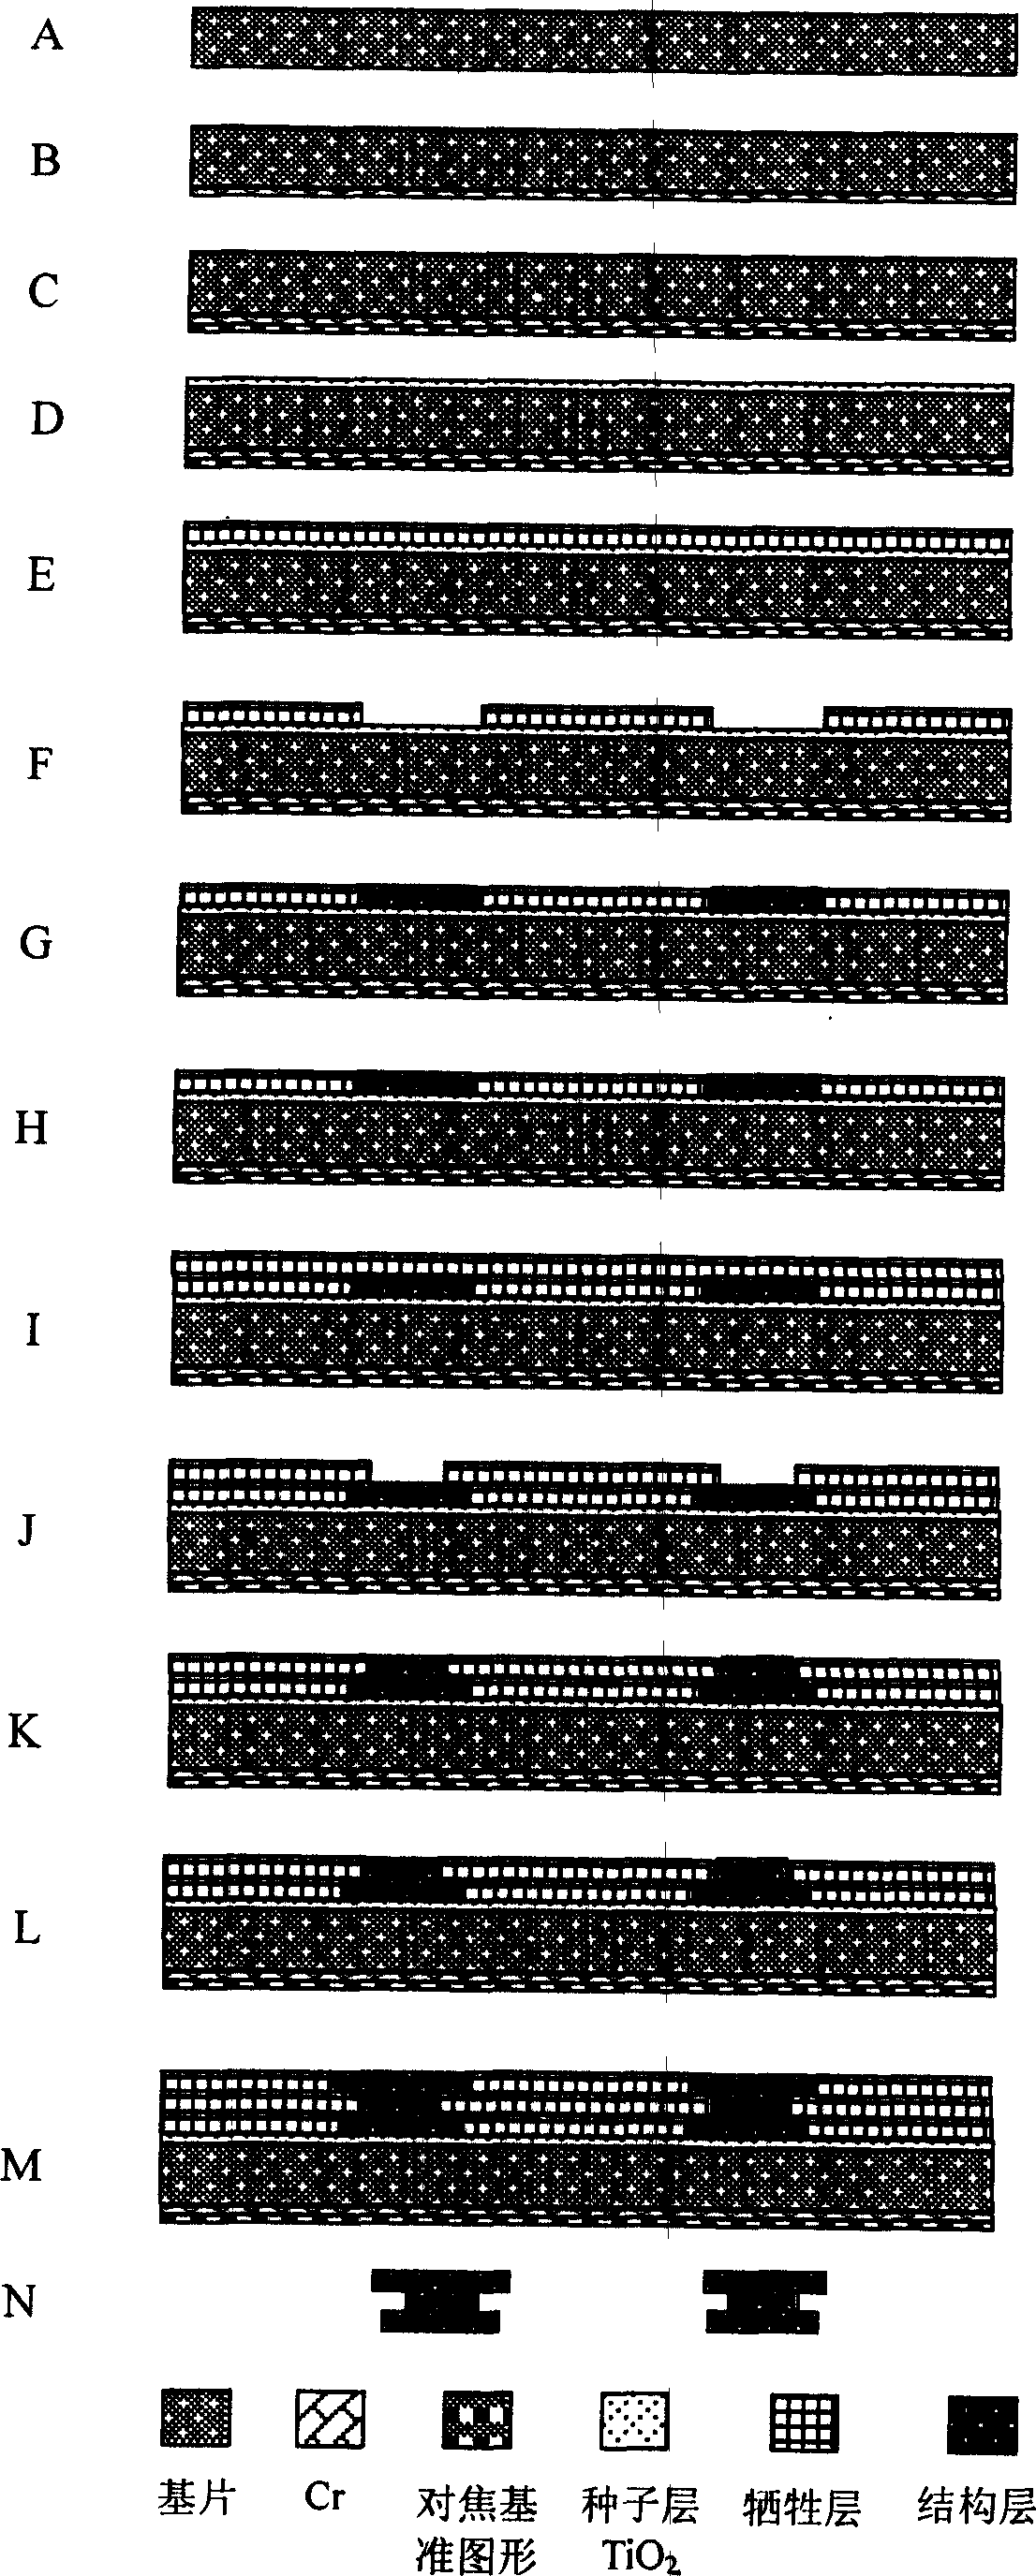 Method for making complicate three dimension microstructure or micro device at low cost